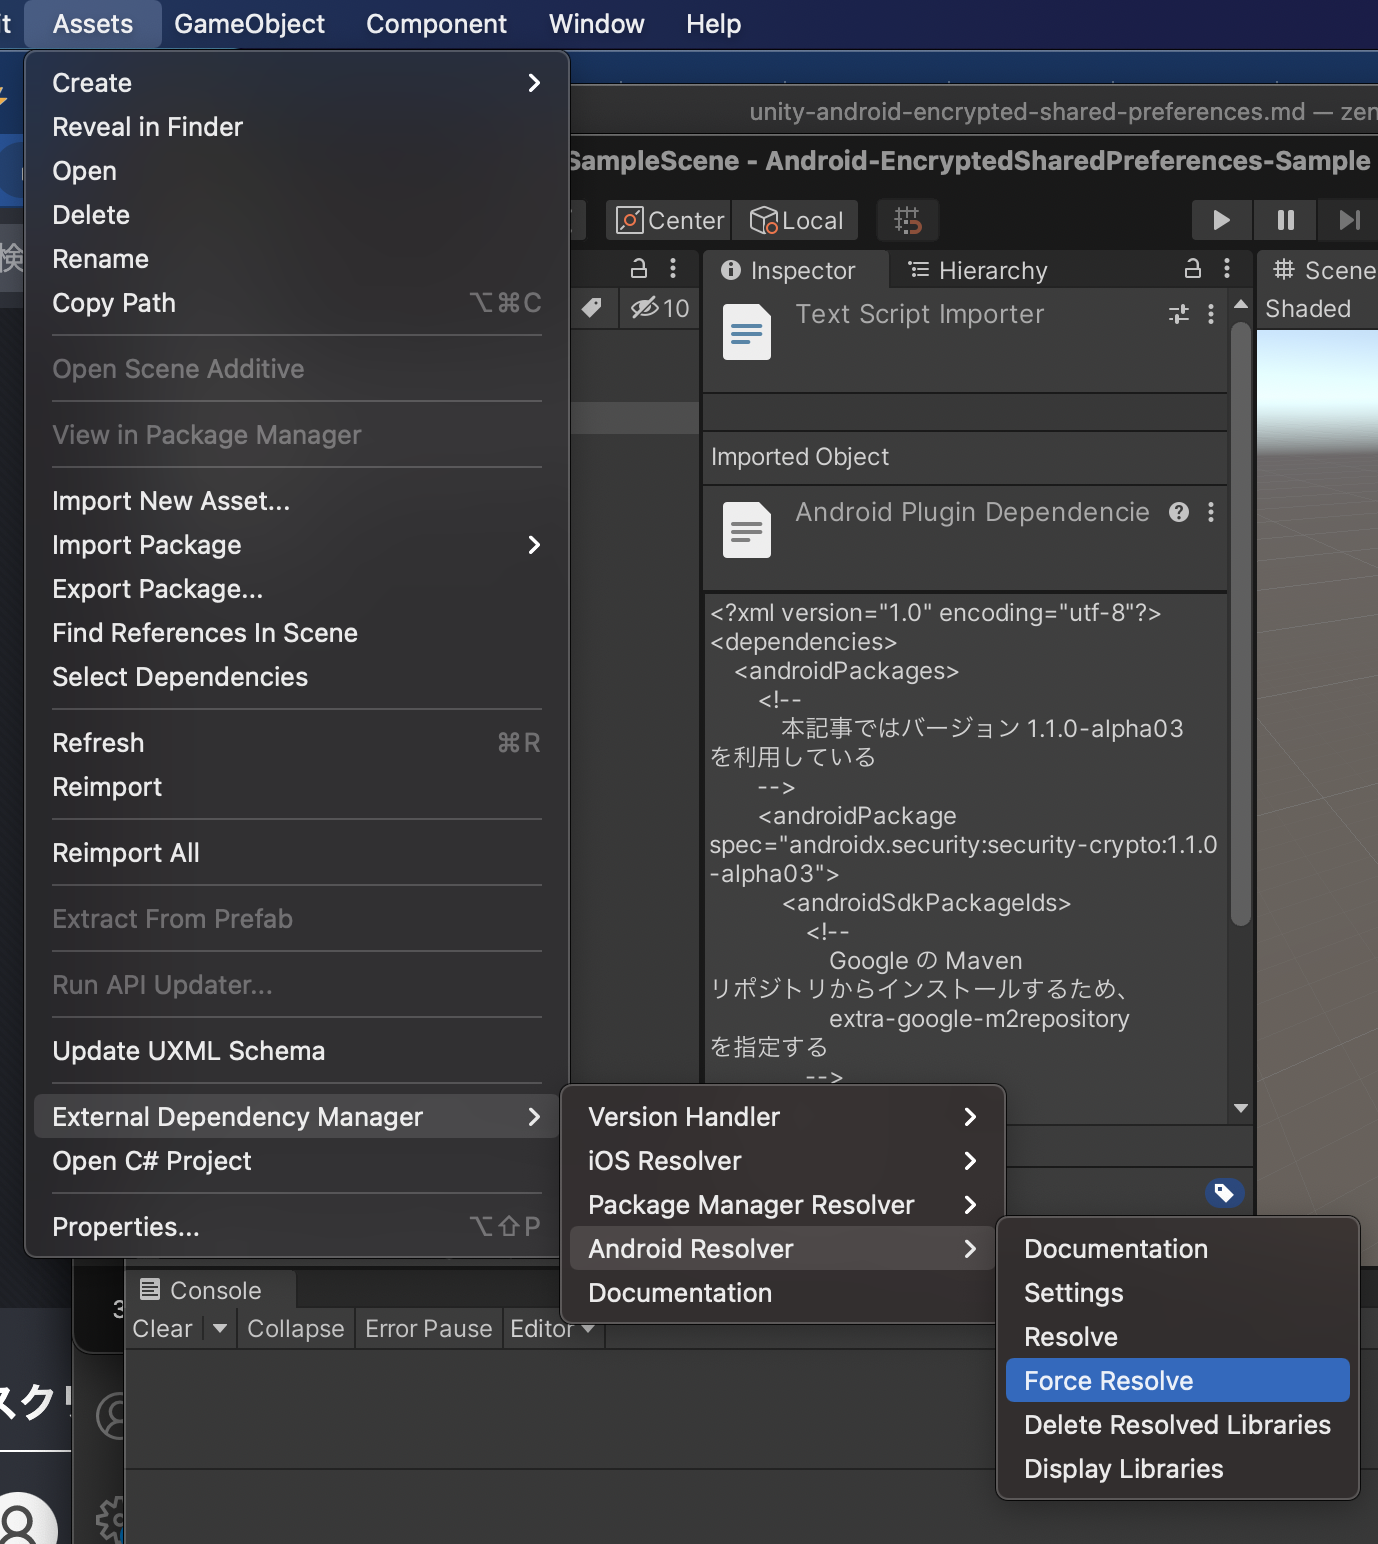 1. Unity メニューから <code>Assets -&gt; External Dependency Manager -&gt; Android Resolver -&gt; Force Resolve</code> を選択する